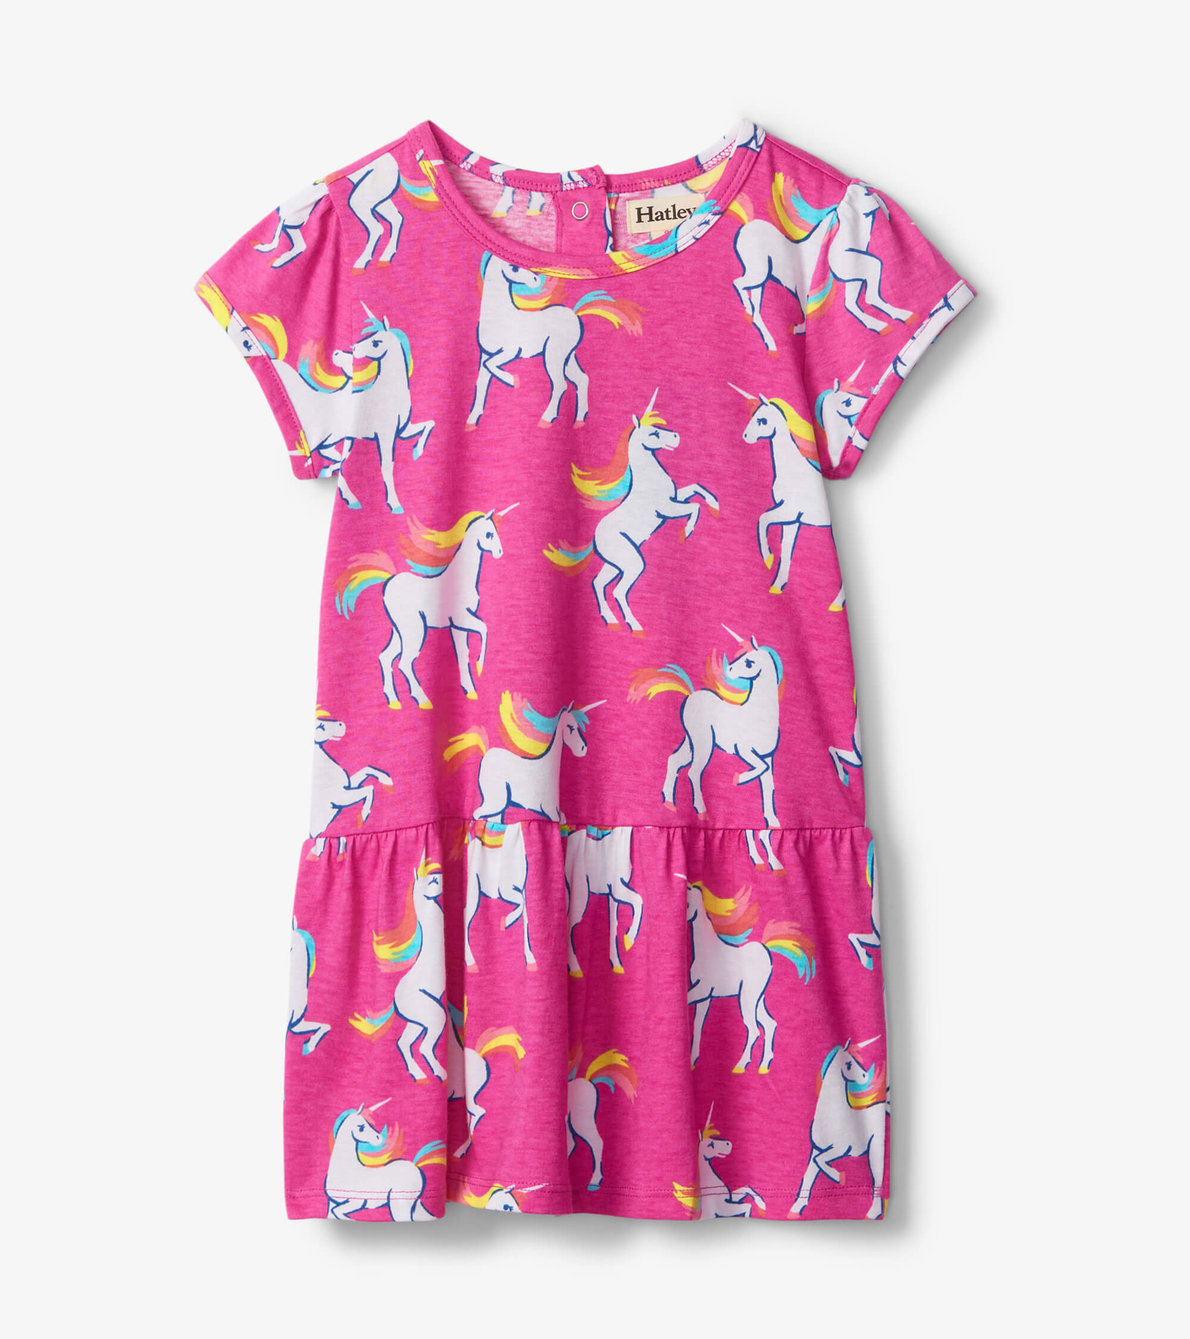 View larger image of Unicorn Sky Dance Toddler Gathered Dress